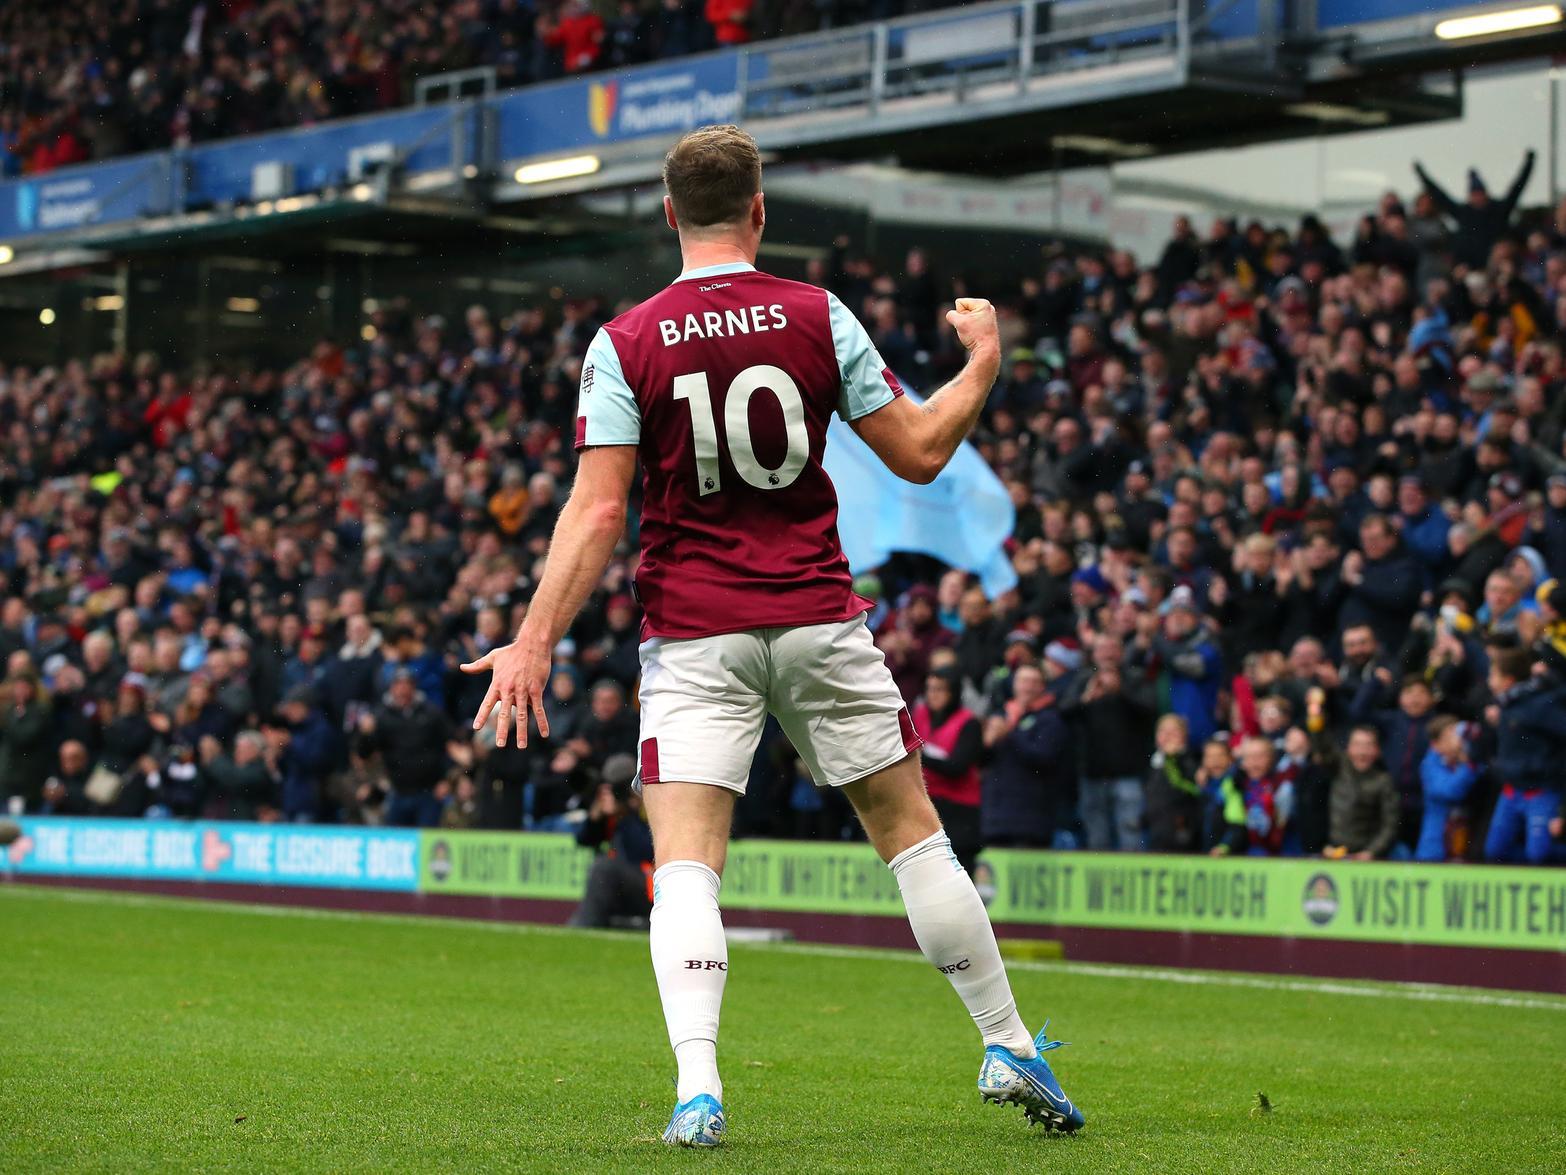 Sean Dyche's side have done well to become Premier League stalwarts, but are yet to recapture the magic that saw them qualify for the Europa League in 2018.